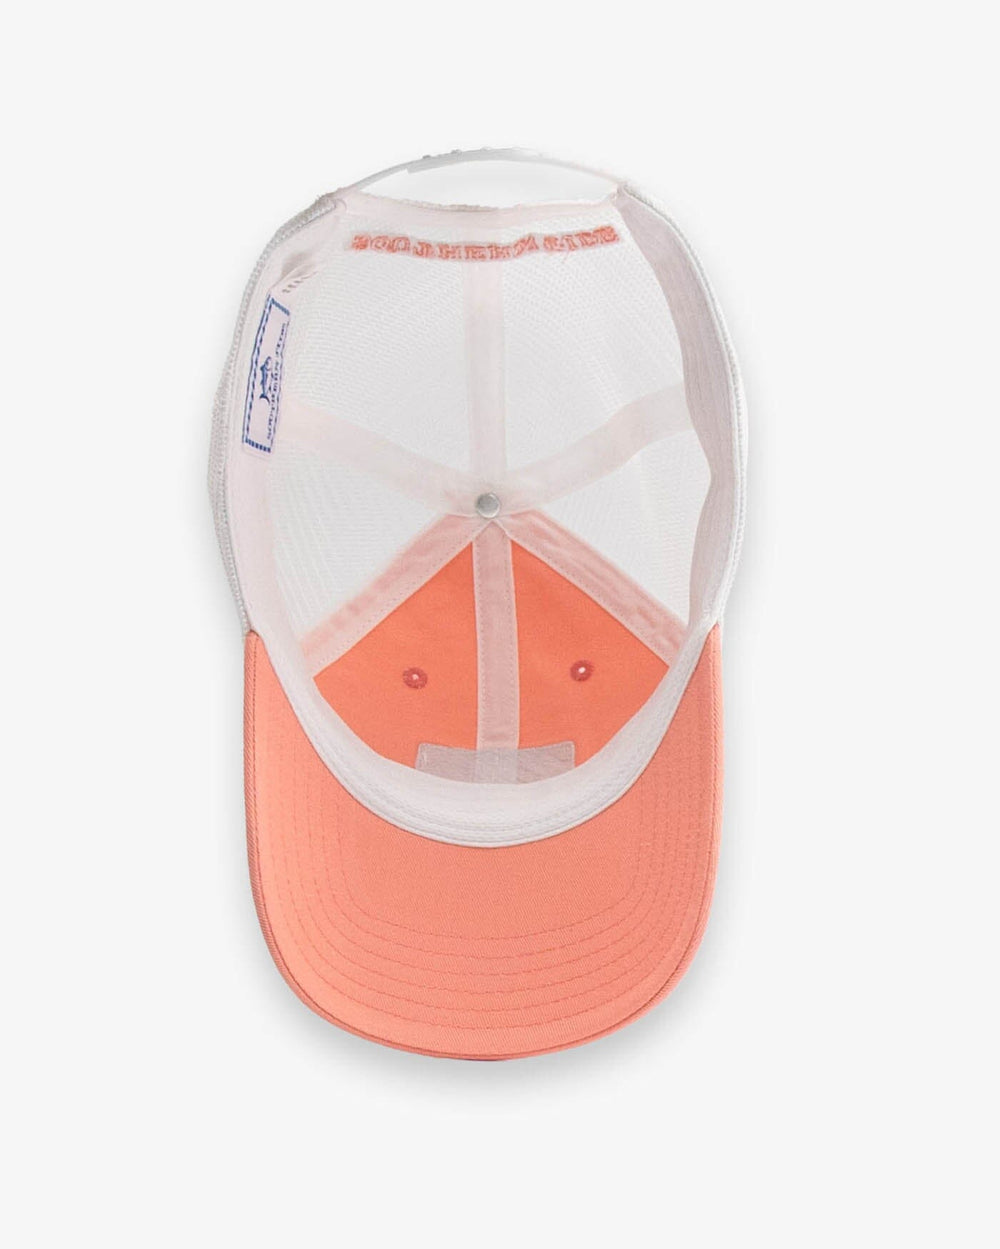 The detail view of the Southern Tide Sun Farer Skipjack Fly Patch Trucker Hat by Southern Tide - Apricot Blush Coral